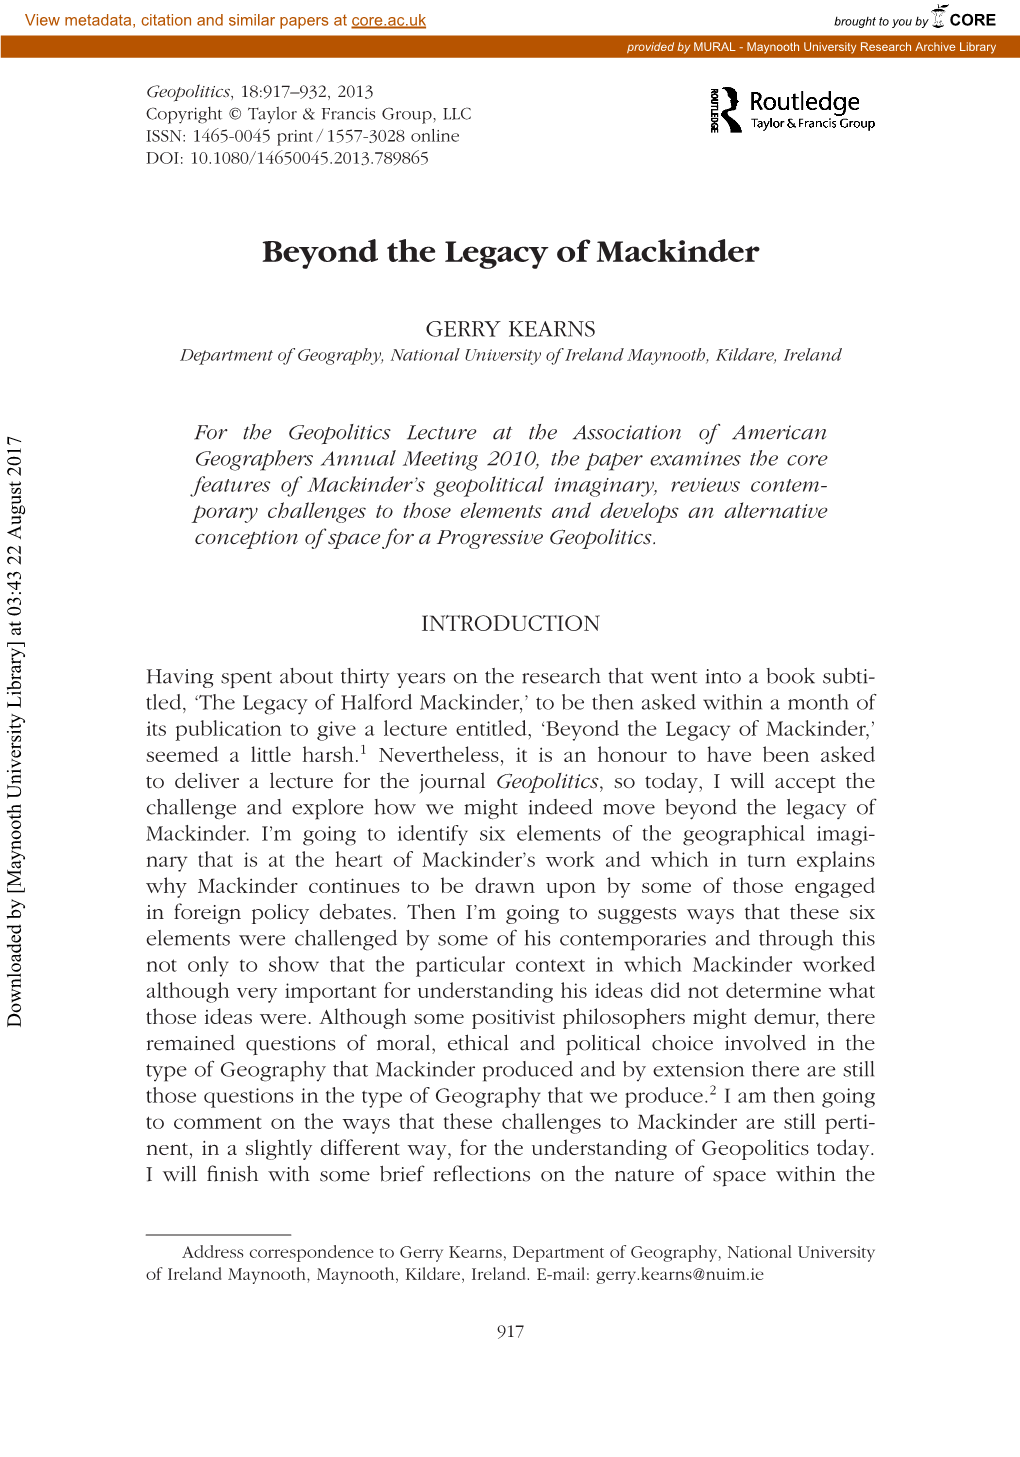 Beyond the Legacy of Mackinder